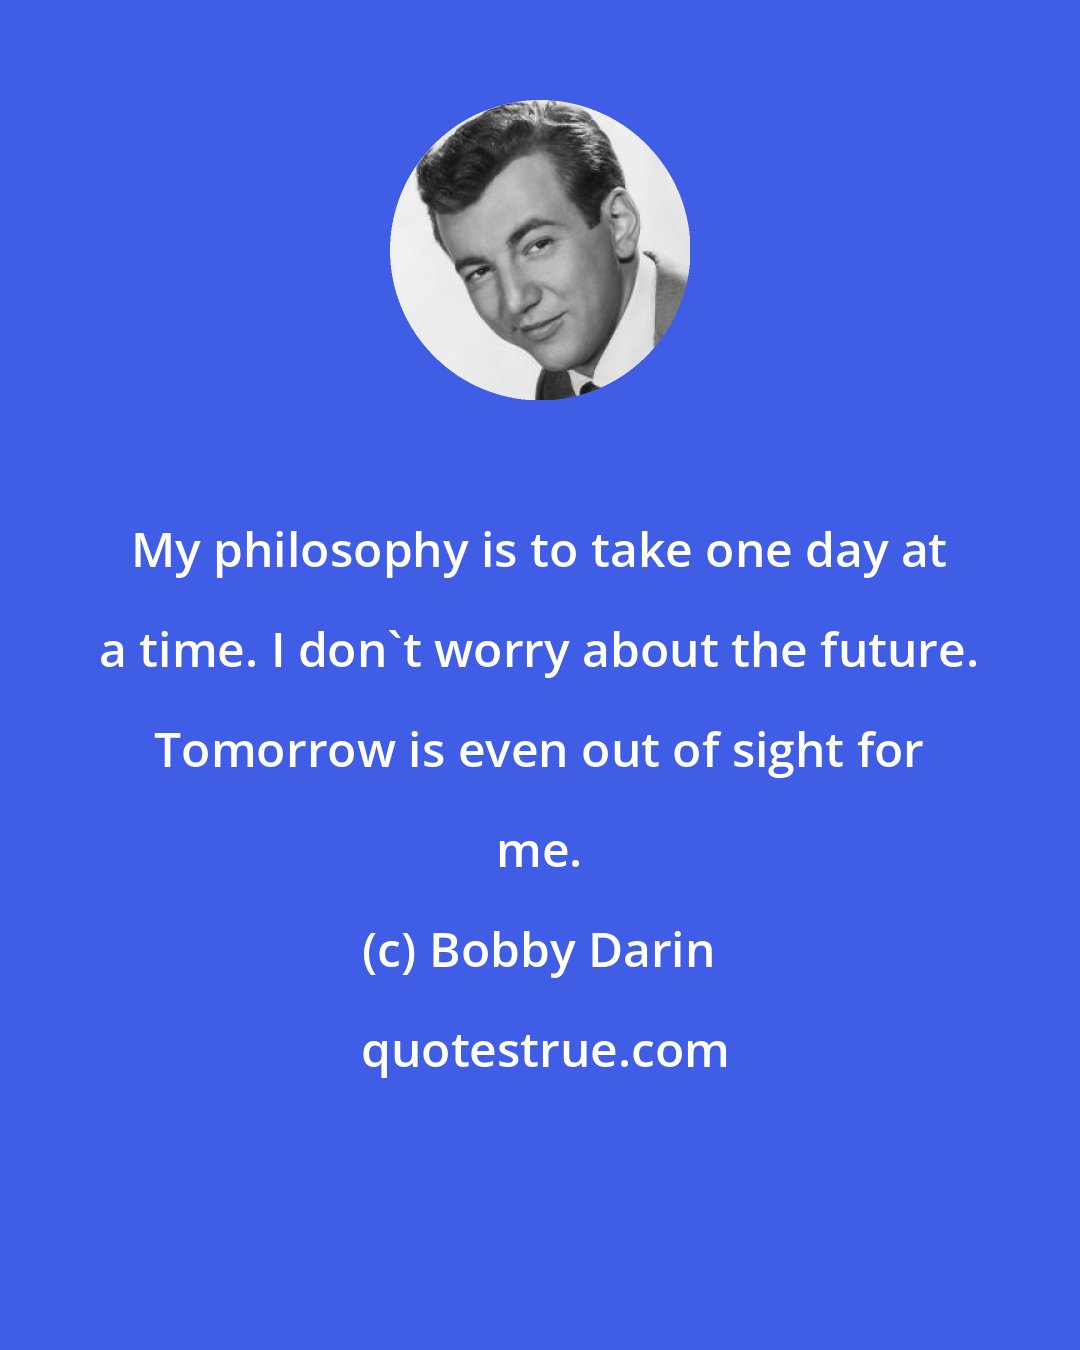 Bobby Darin: My philosophy is to take one day at a time. I don't worry about the future. Tomorrow is even out of sight for me.